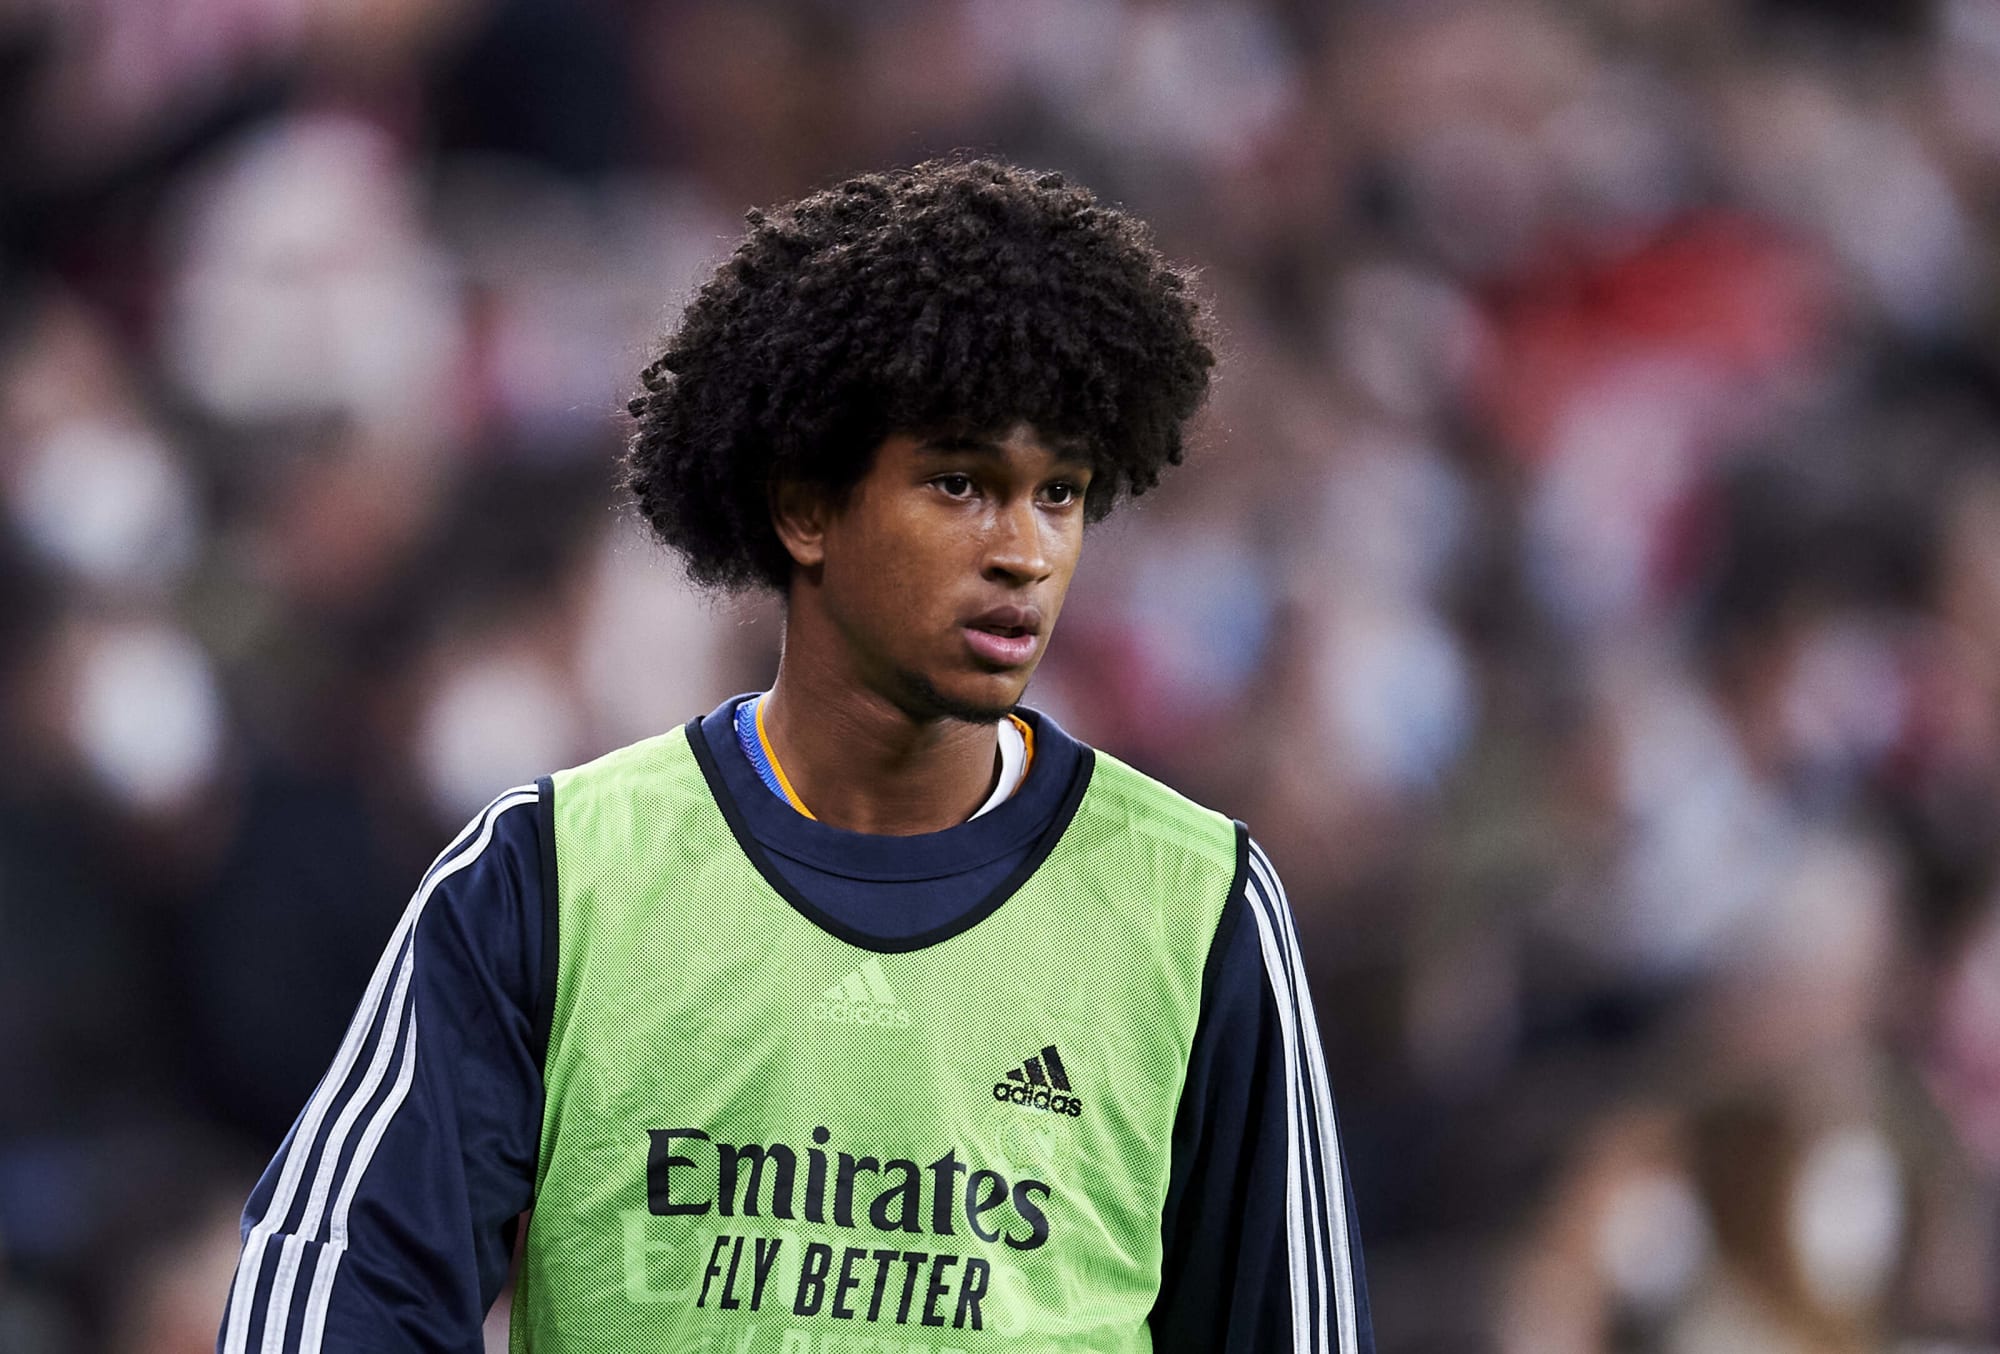  3 Real Madrid Castilla players who should get a chance vs. Levante